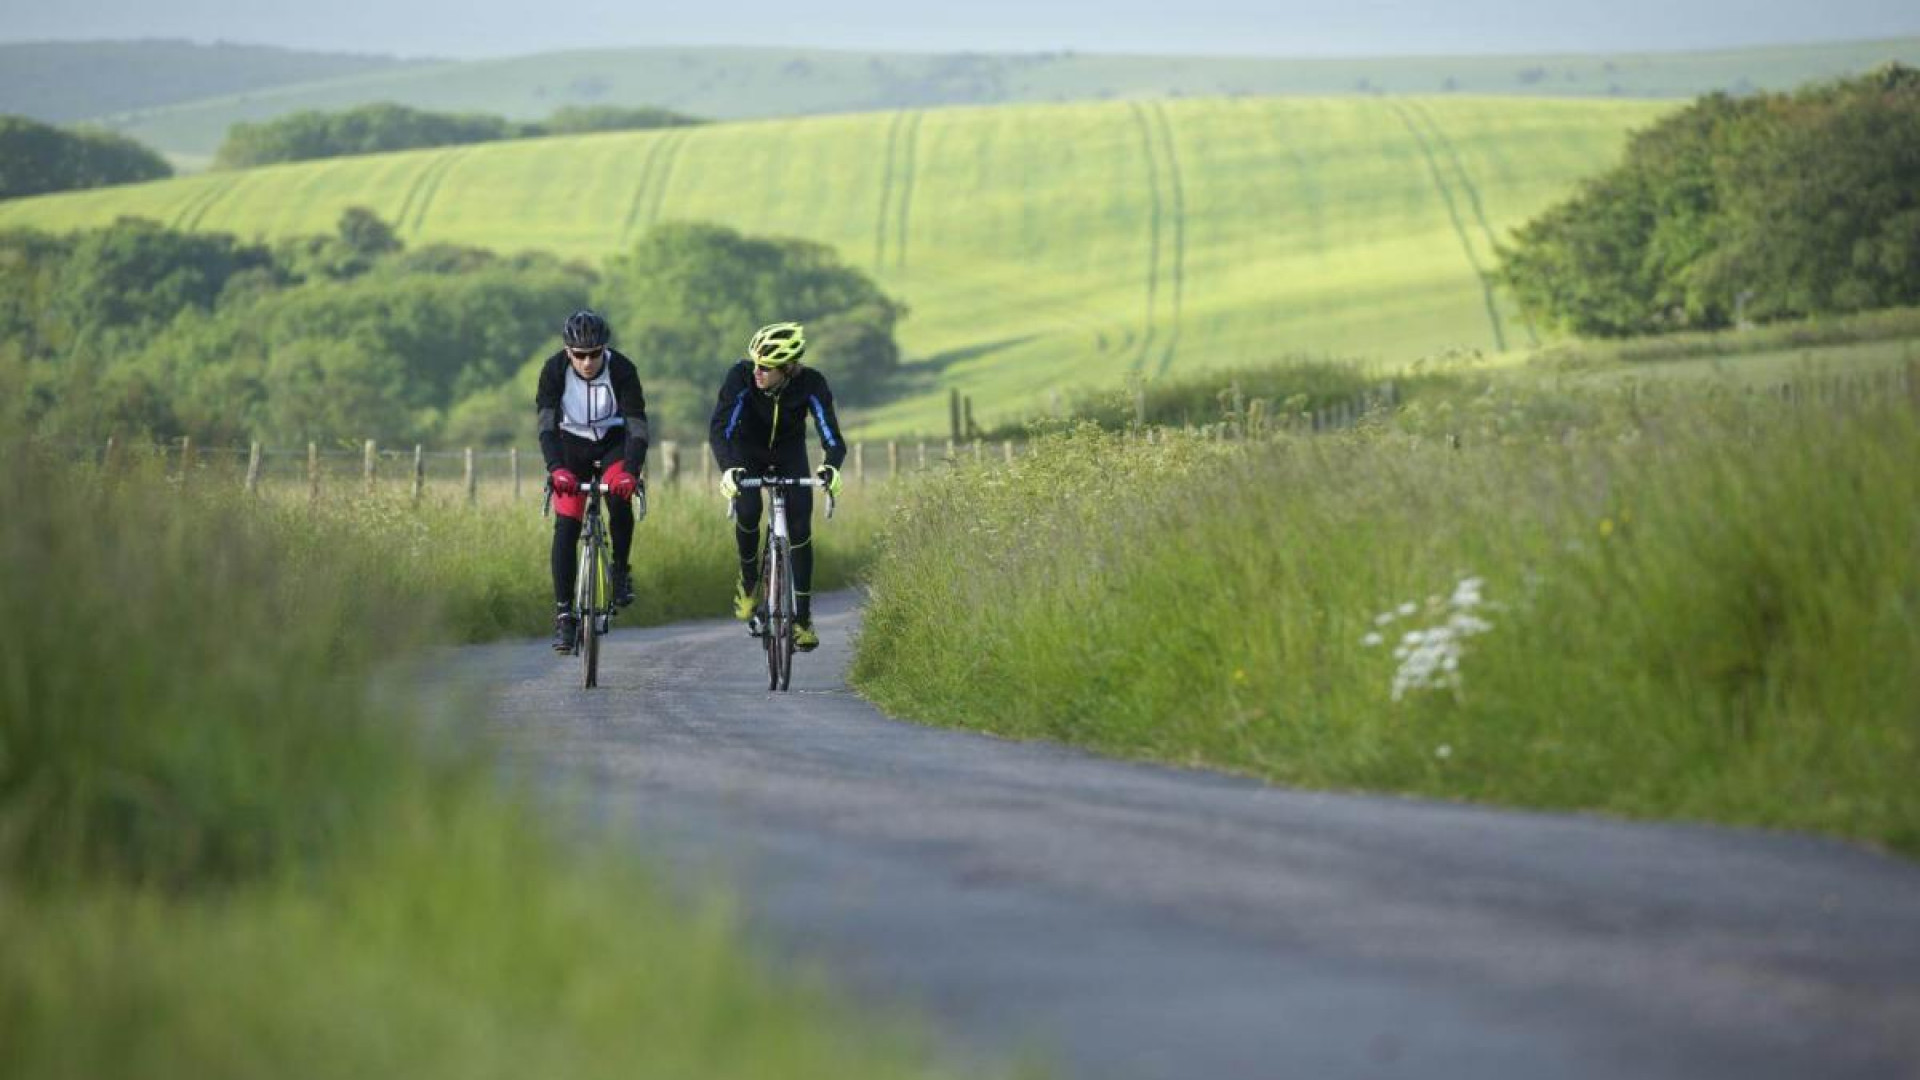 Two cyclists riding together on an empty country road on a clear summers day